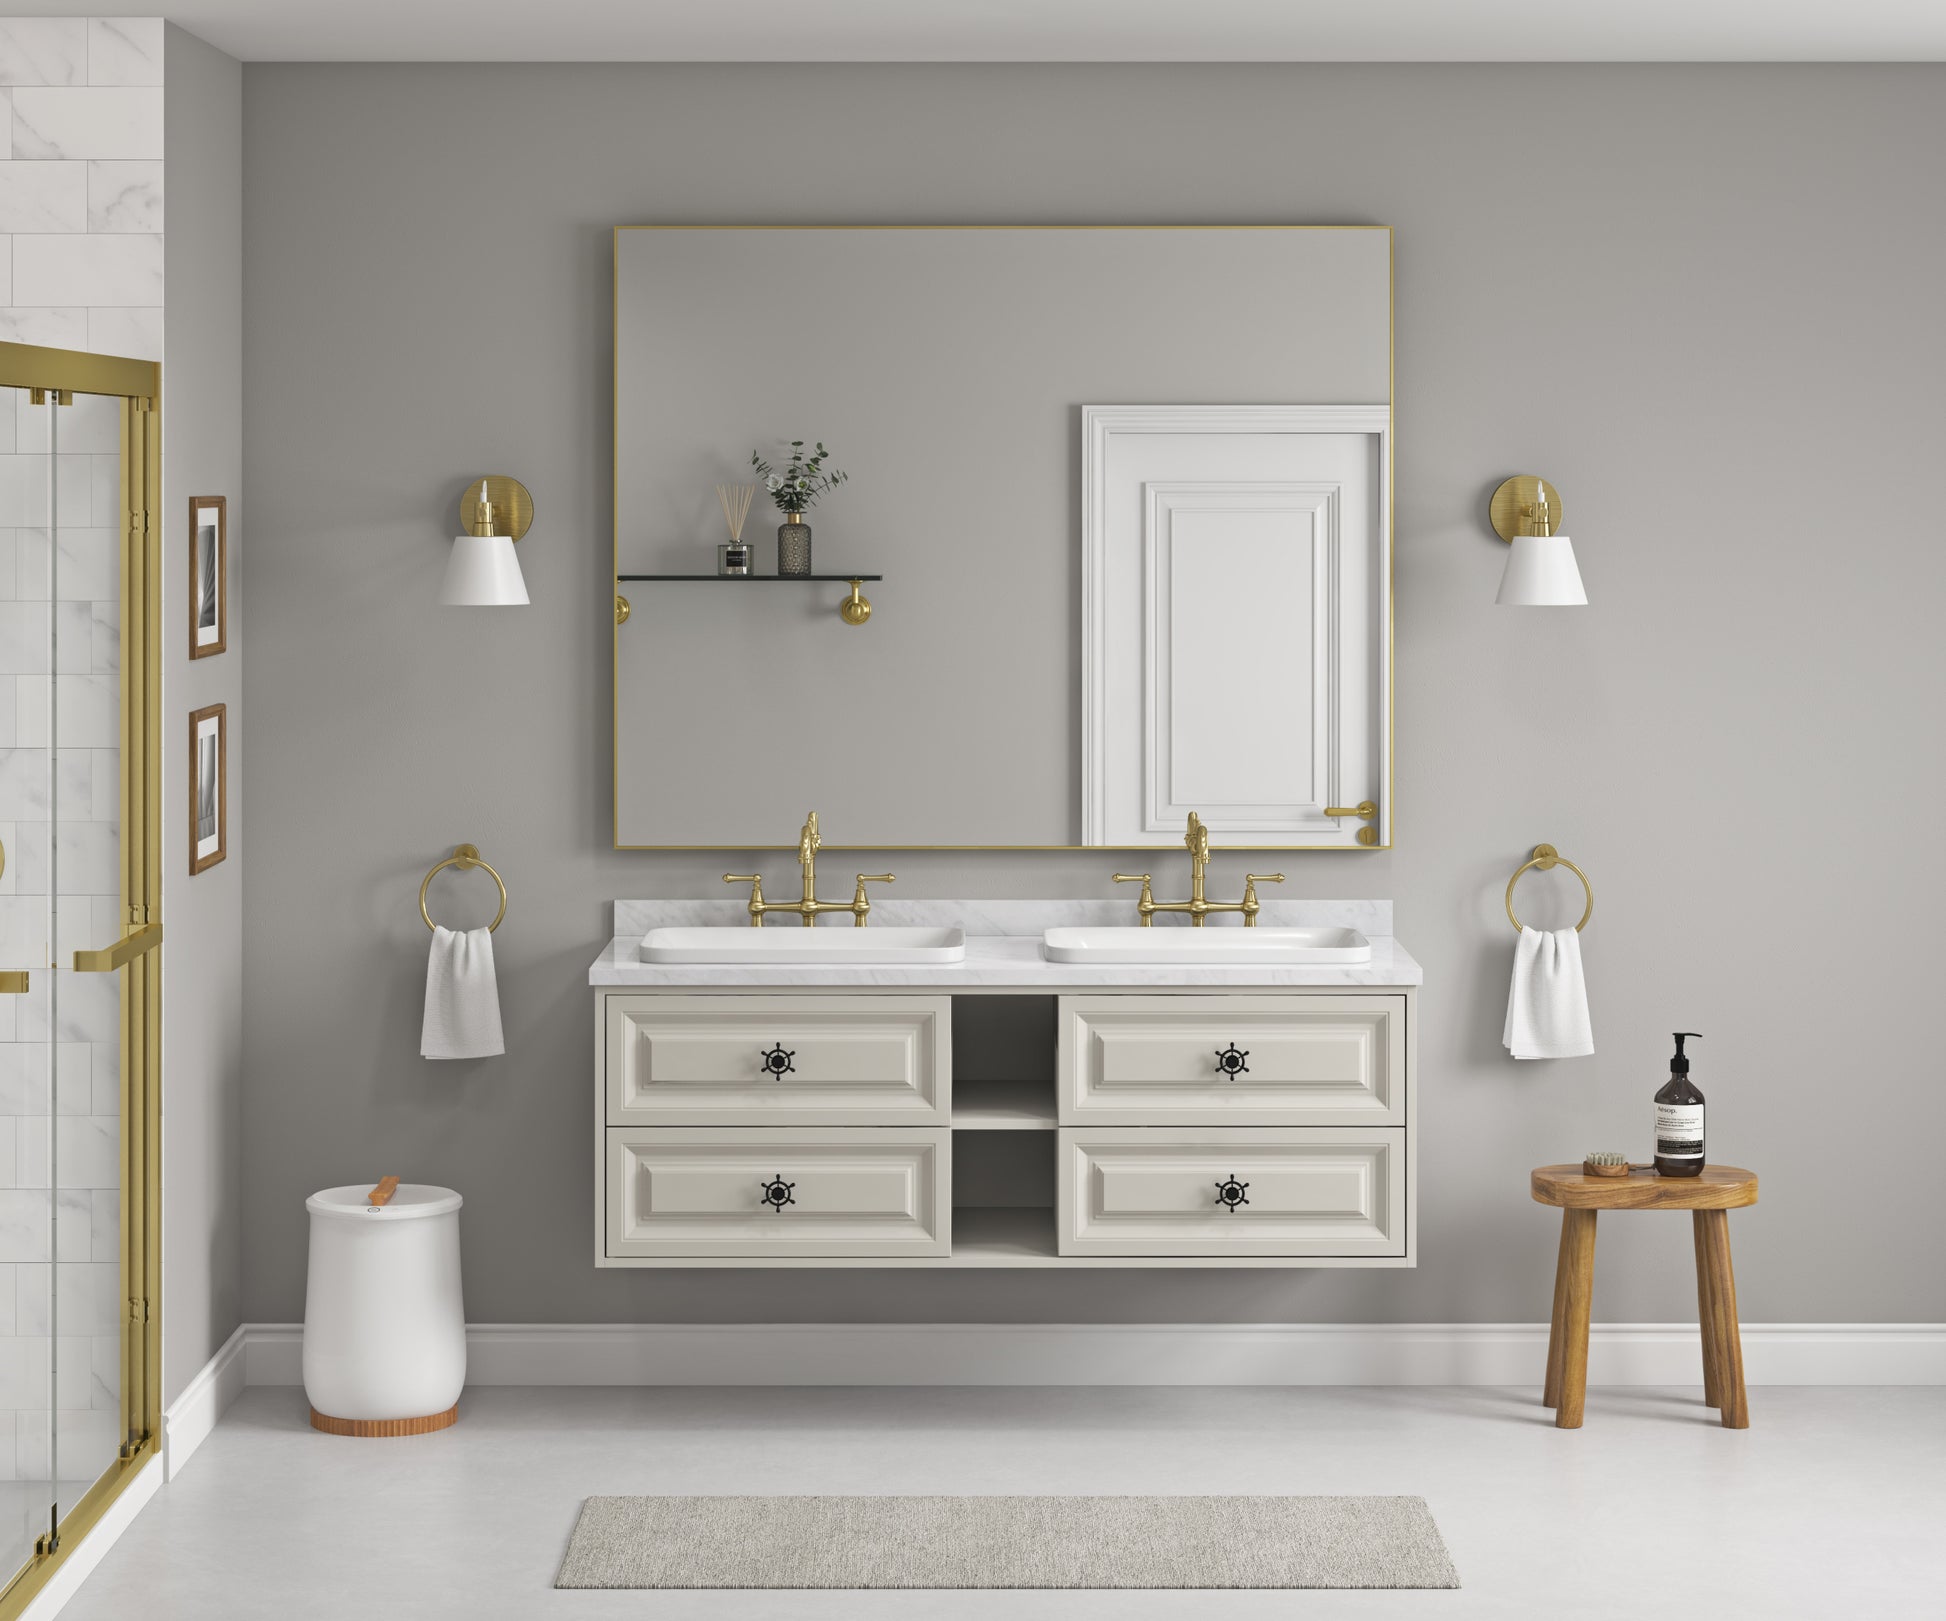 60*23*21in Wall Hung Doulble Sink Bath Vanity Cabinet khaki-abs+steel(q235)+wood+pvc